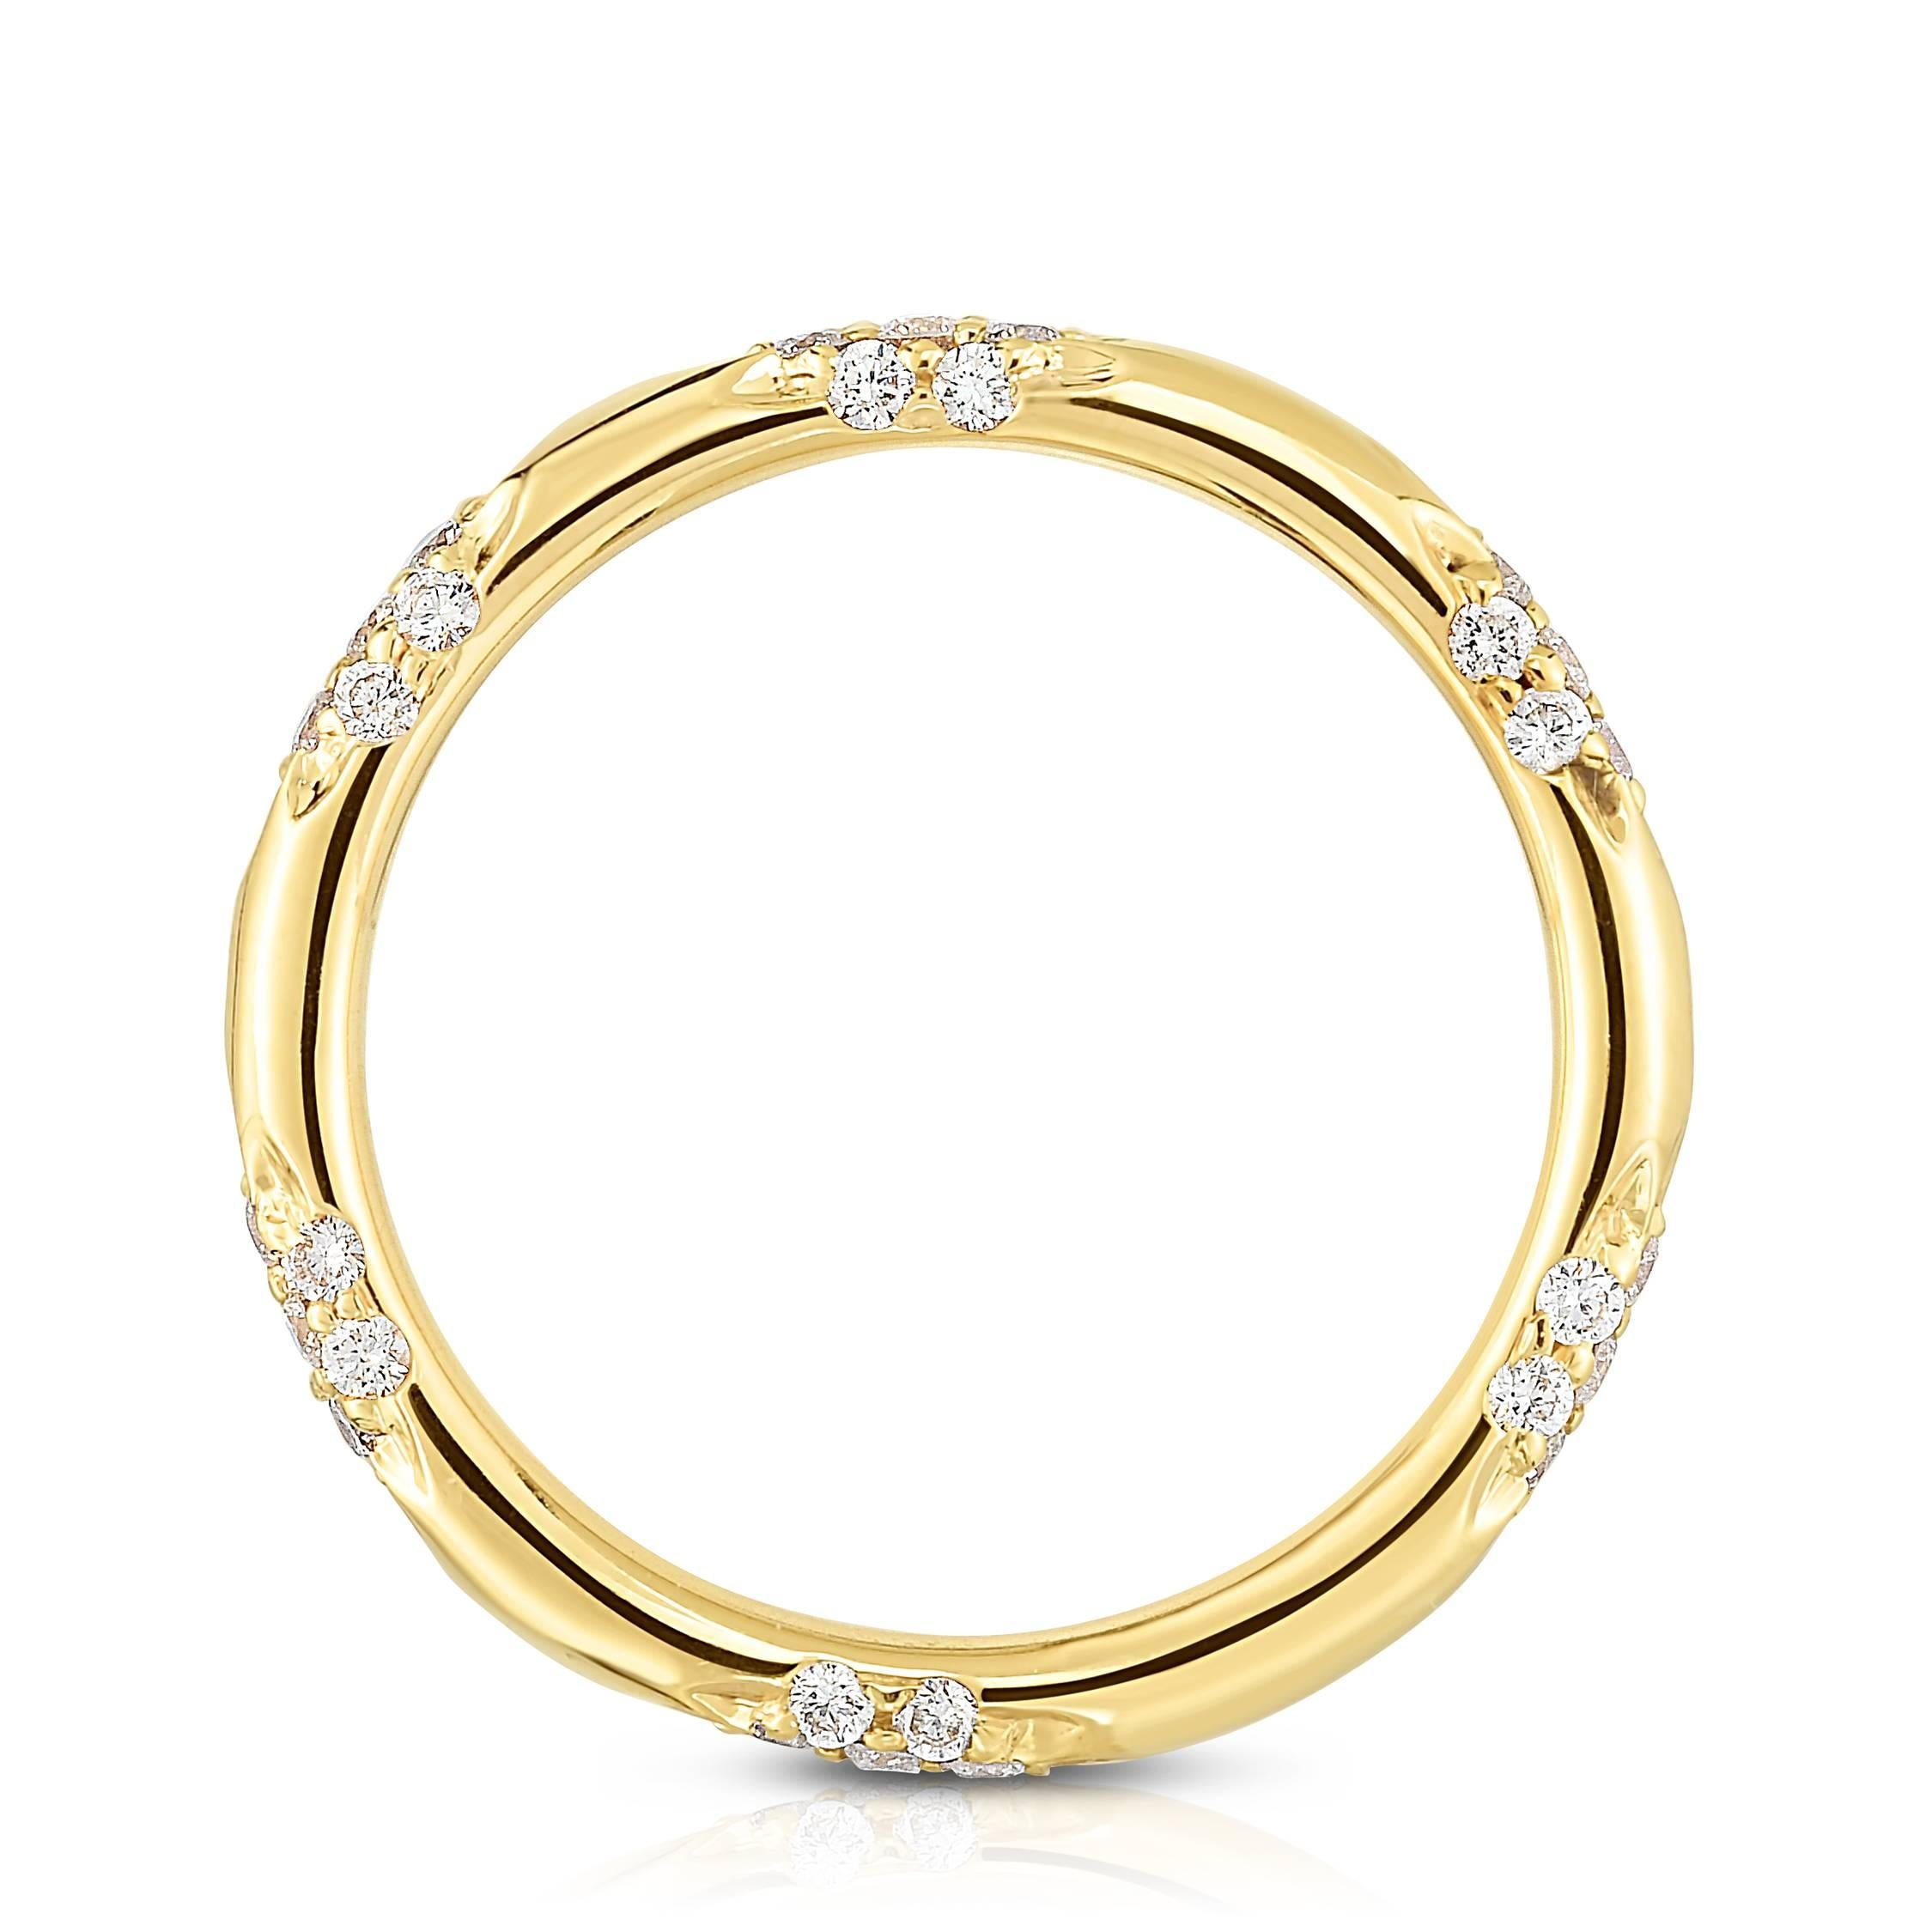 Micro Pave 'Nesi' band is perfect for those deciding between a plain  18k yellow gold wedding band and a micro pave wedding band. This ring also makes the perfect anniversary present, birthday gift or push present, especially for any April baby for